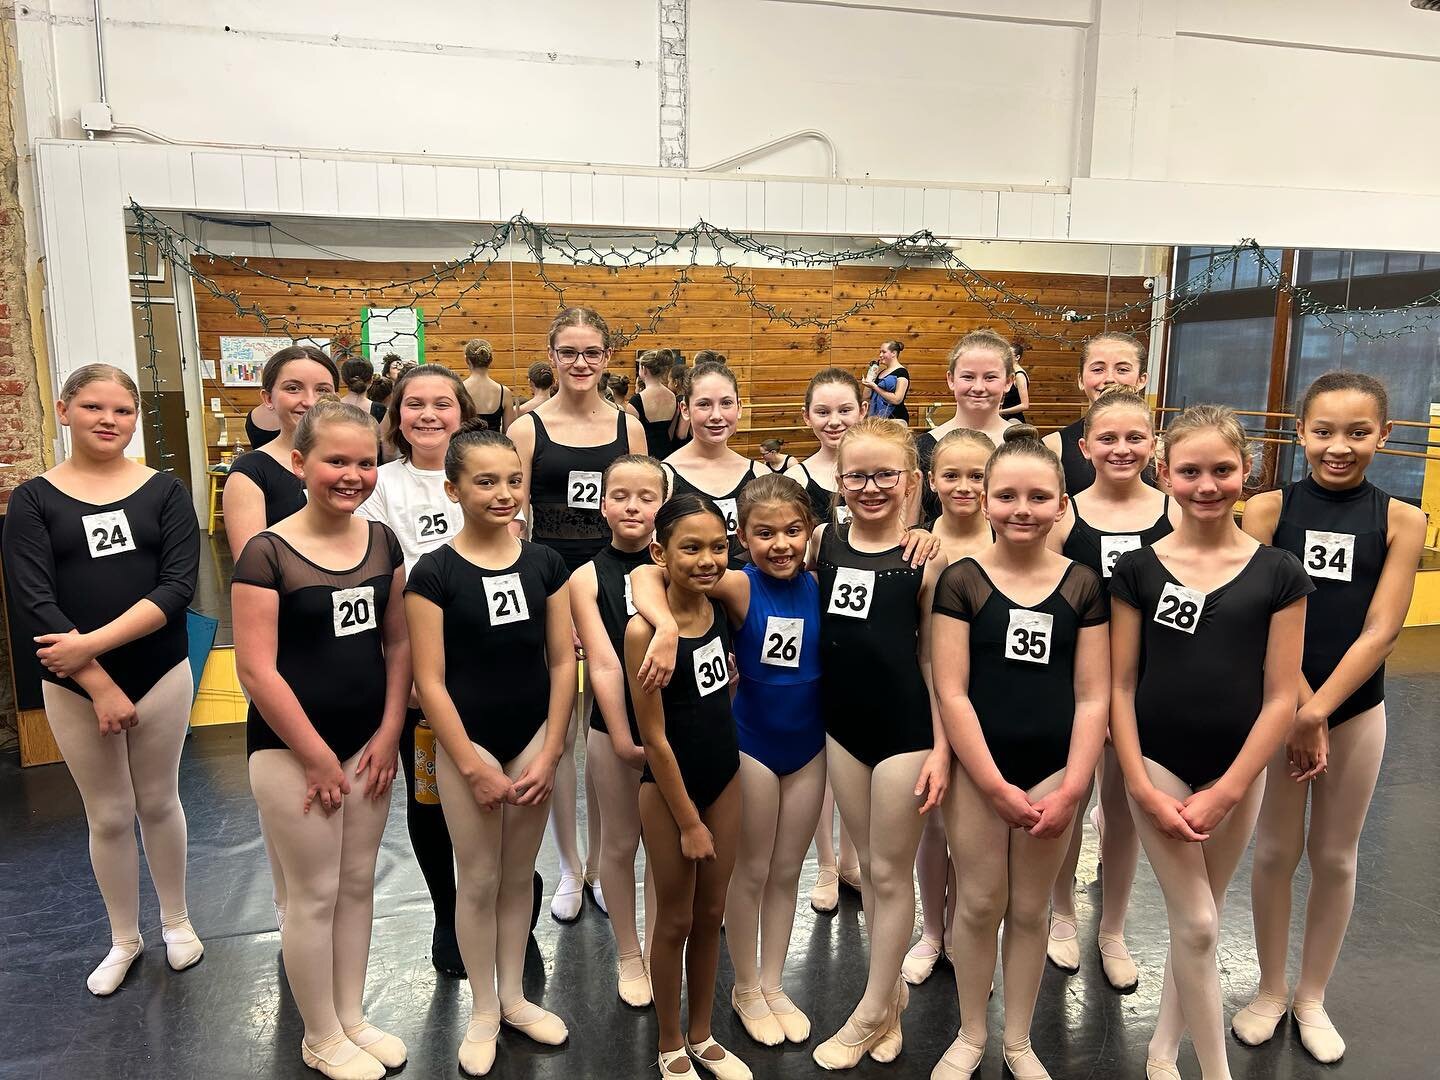 I can&rsquo;t believe we&rsquo;re going to say this but we held our open call auditions for our Nutcracker production coming this year. 😮 

So great to see everyone&rsquo;s excitement! 🩰 
.
.
.
#dgyouthballet #siouxfallsdancers #siouxfallsdancer #s